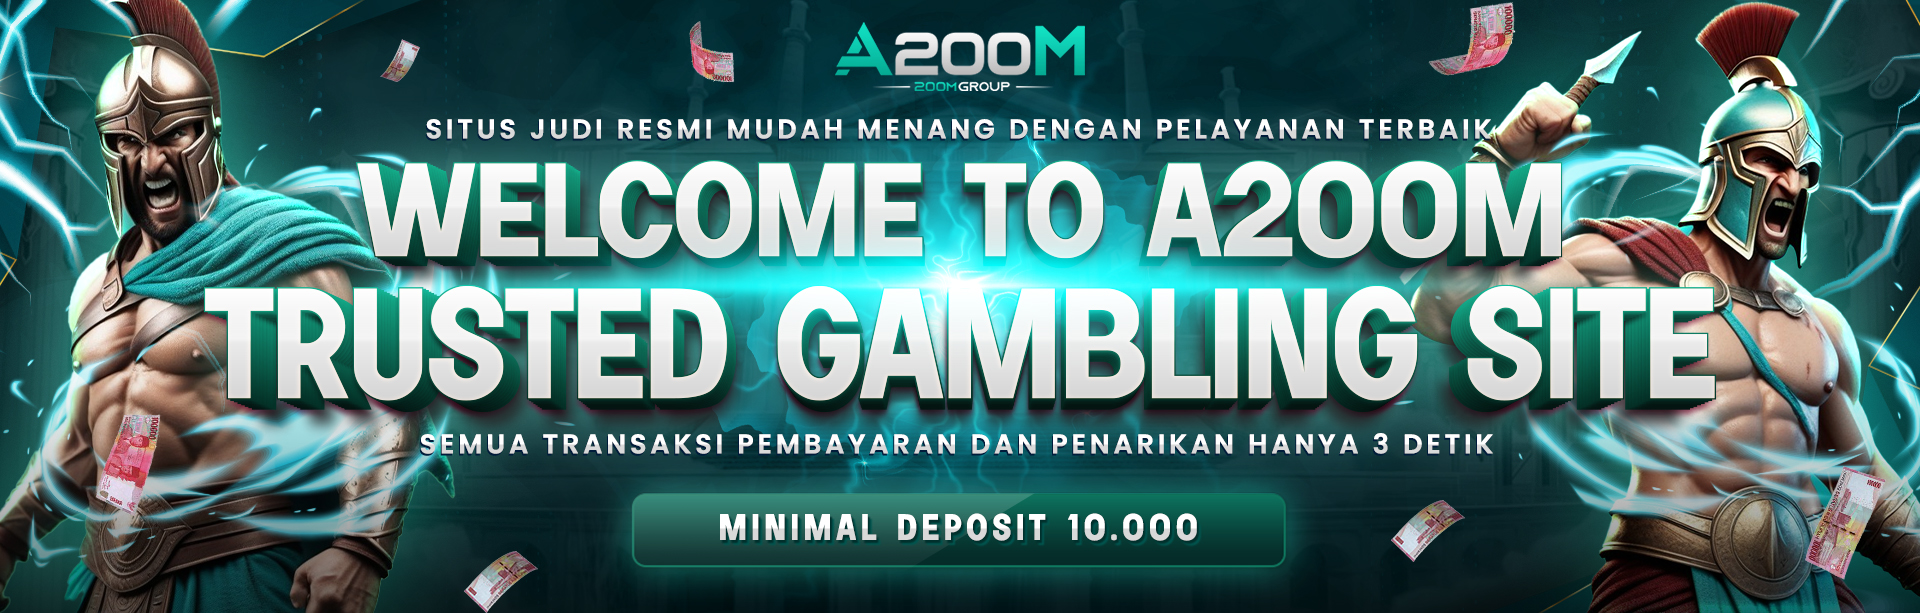 WELCOME A200M